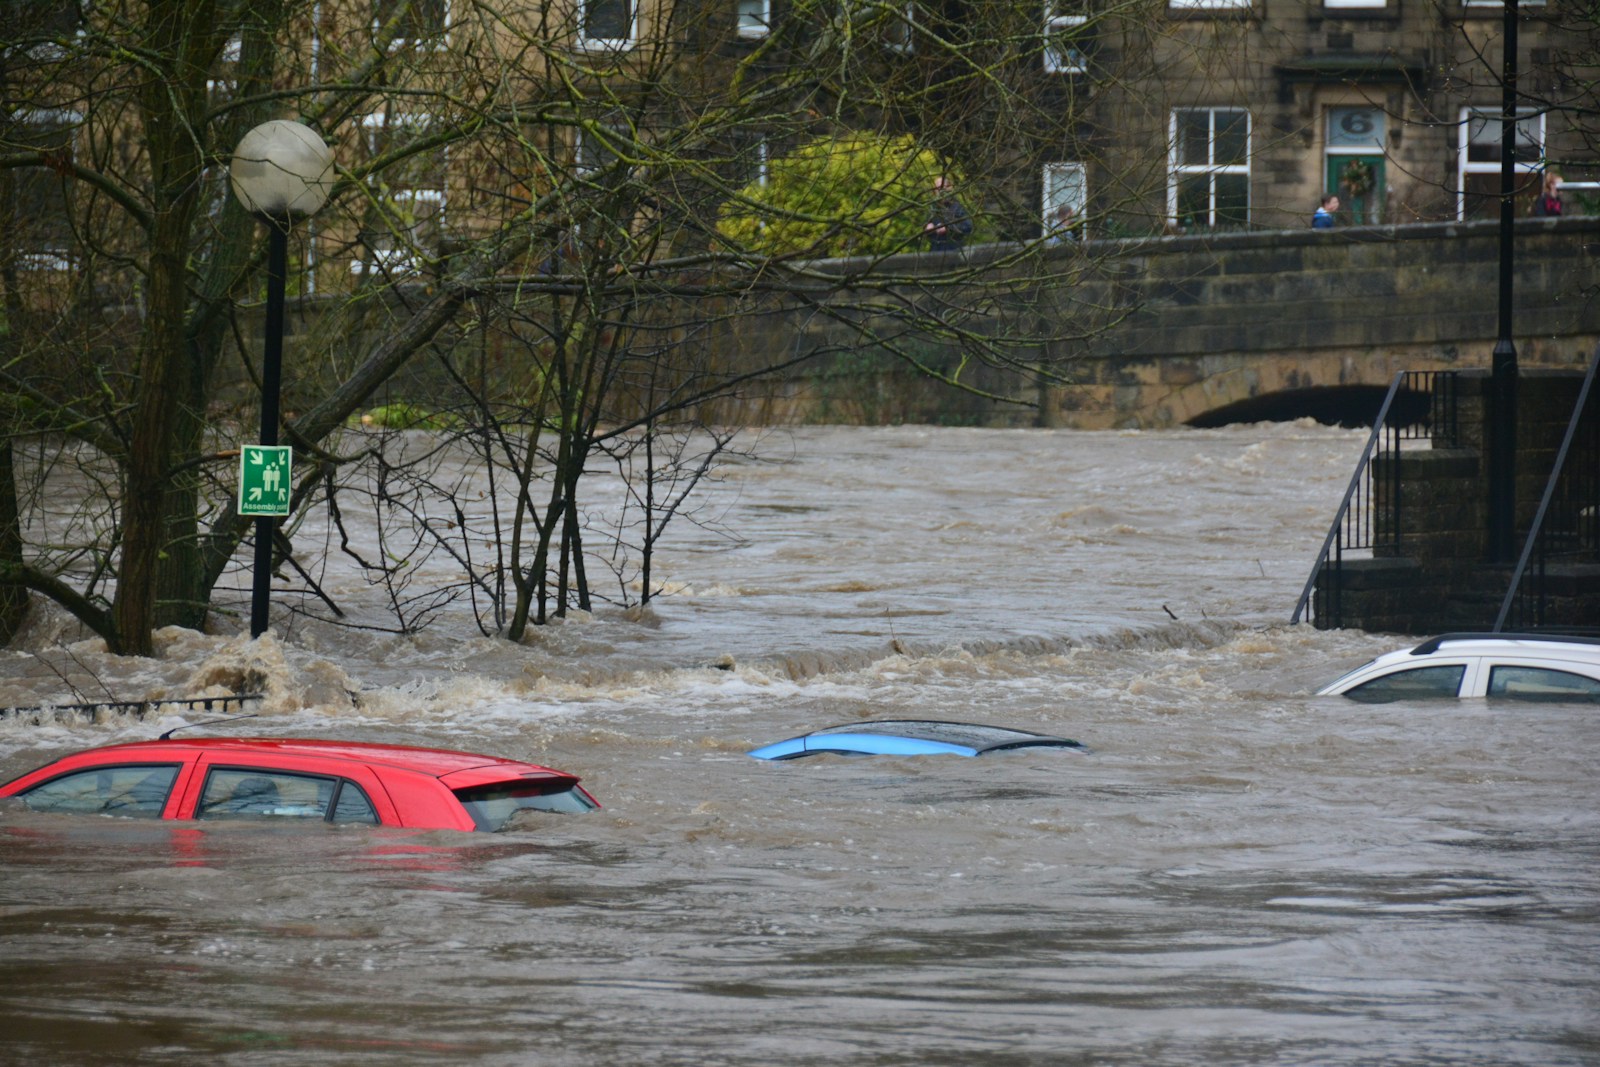 car with flood insurance in body of water